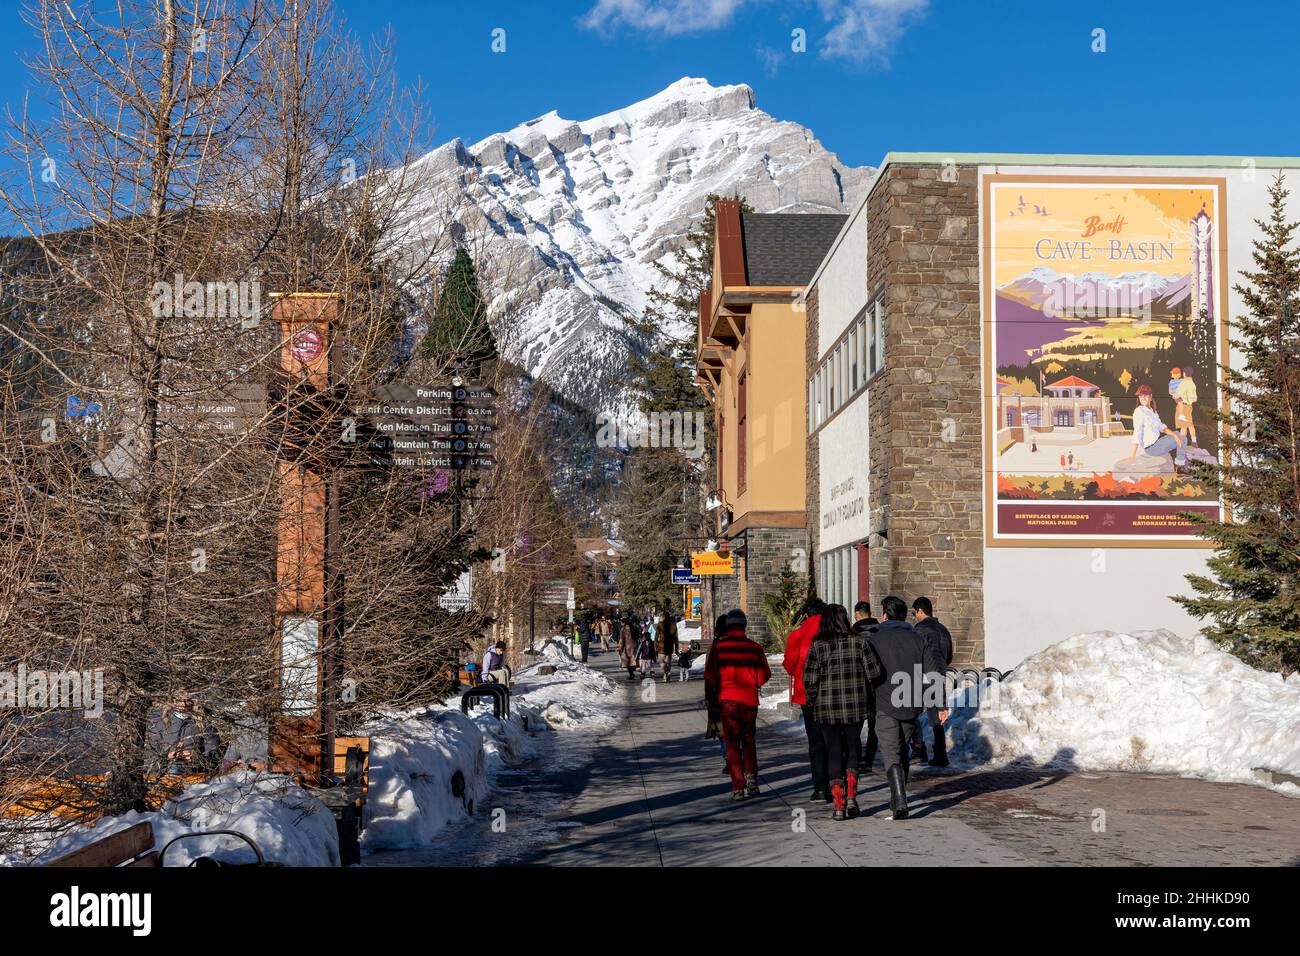 Banff, Alberta, Canada - January 23 2022 : Tourists shopping on Banff Avenue in winter during covid-19 pandemic period. Stock Photo